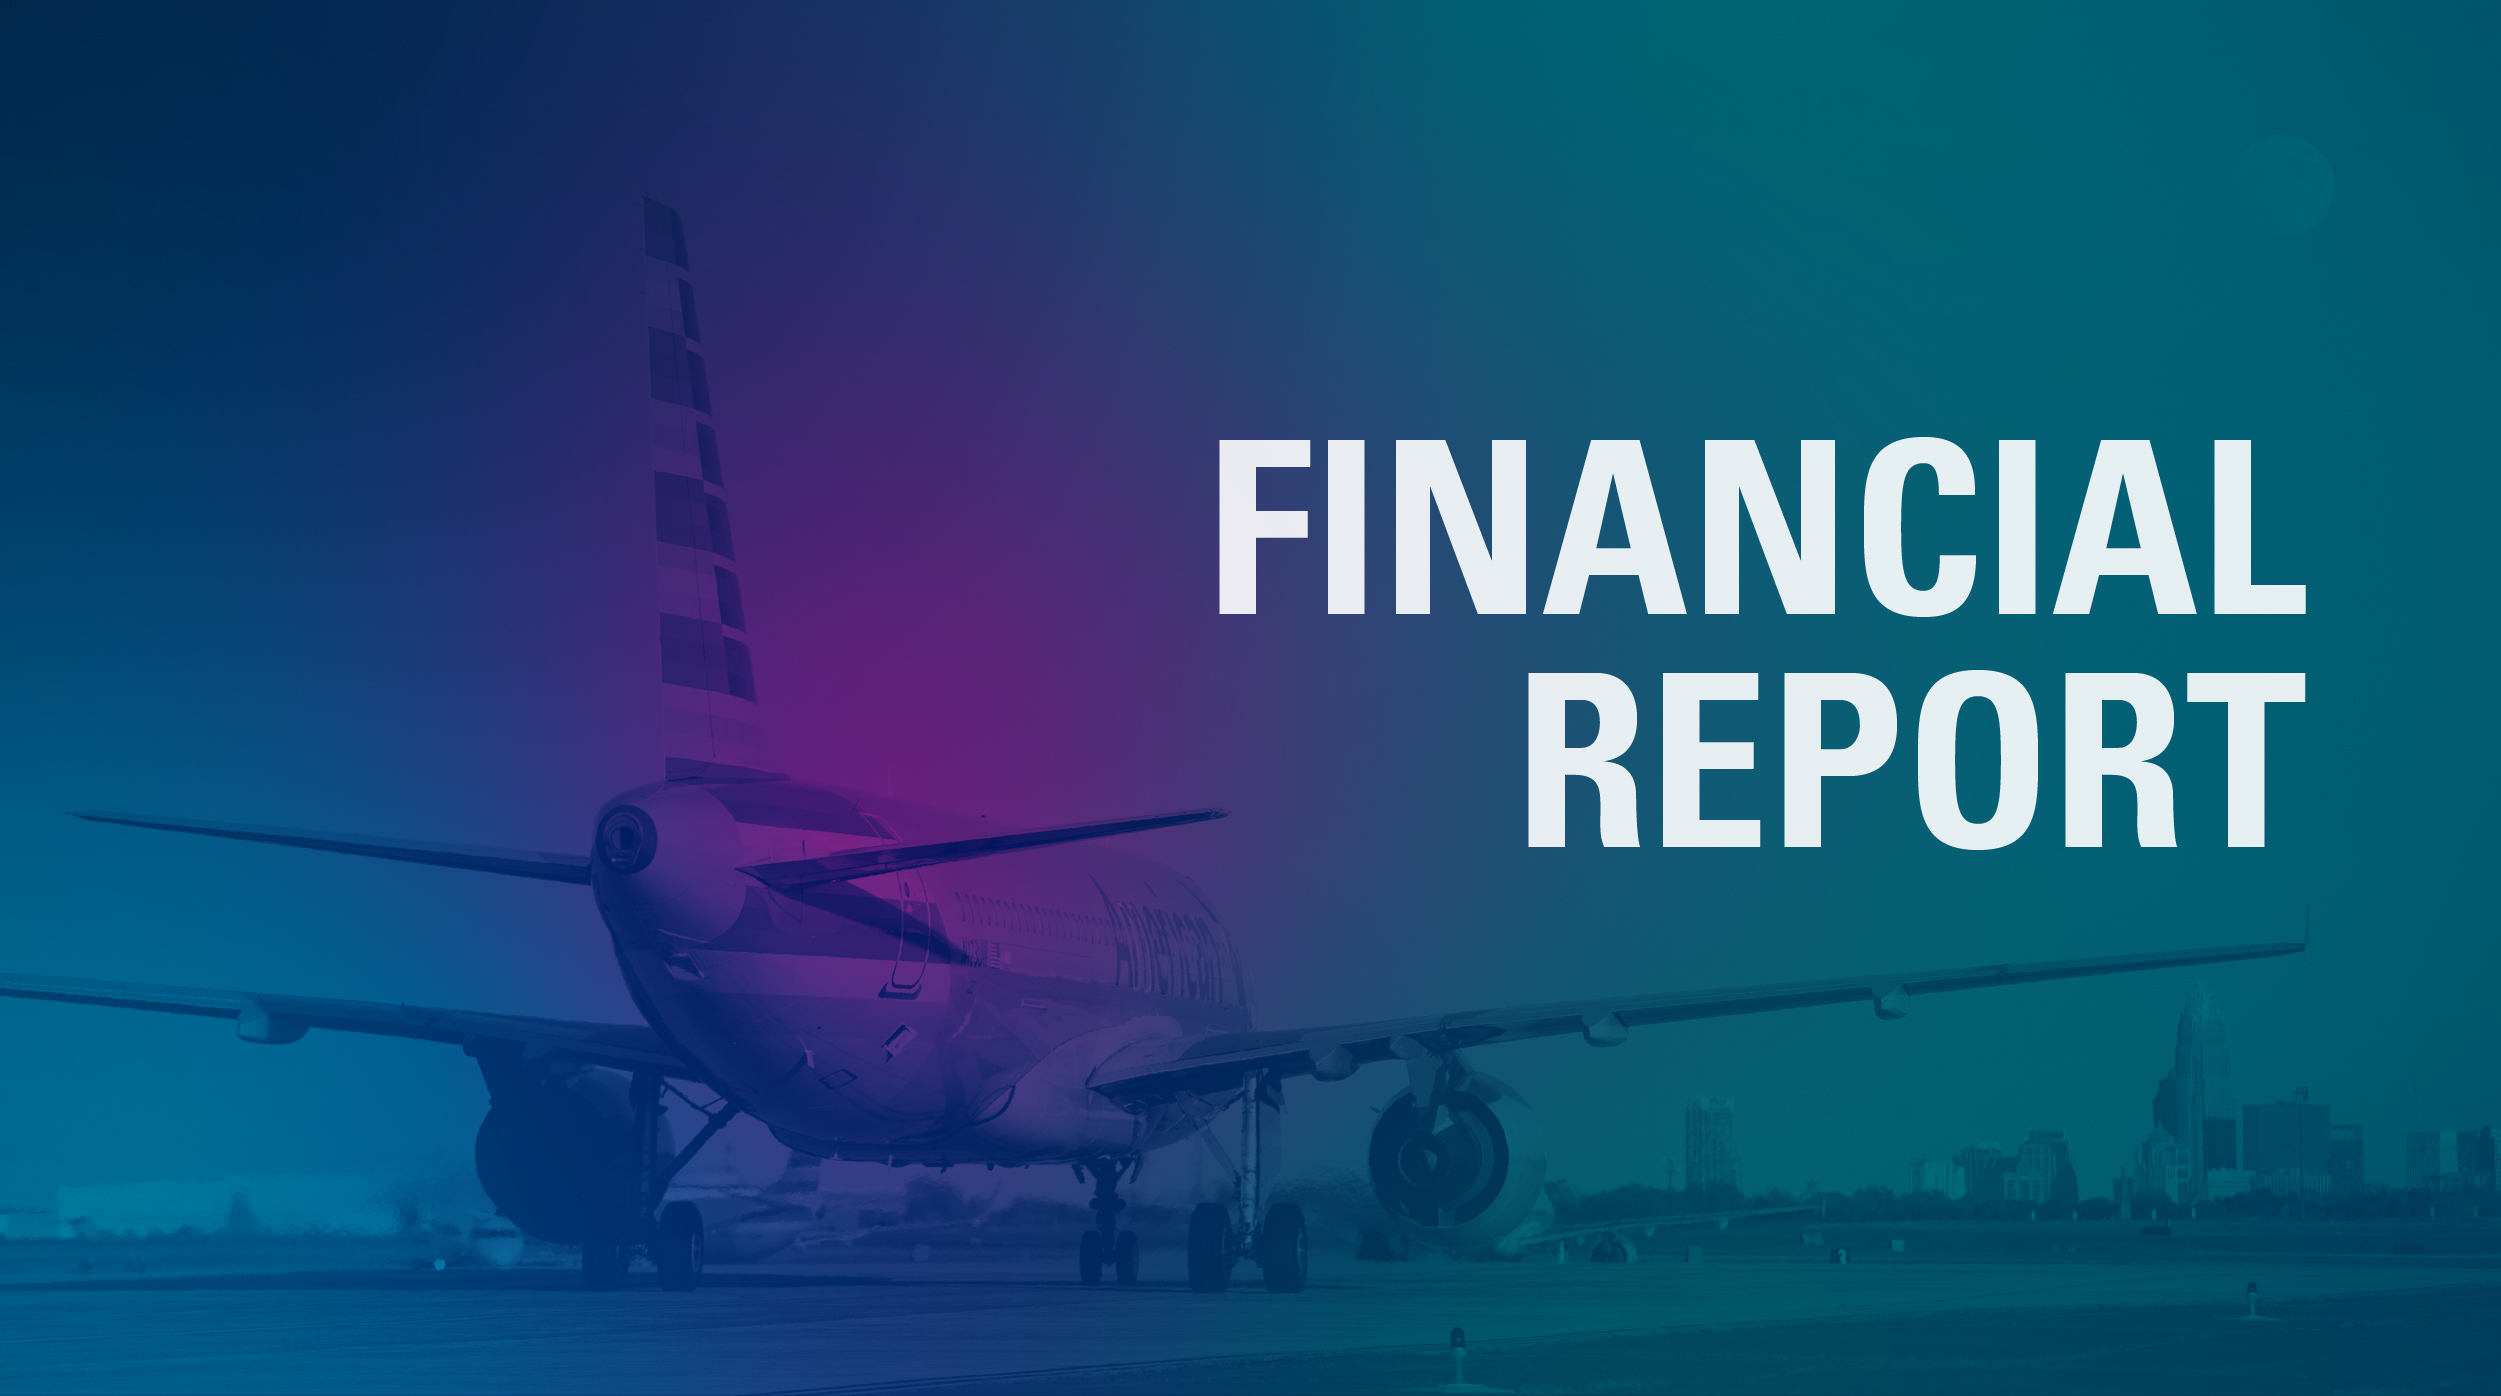 Financial Report graphic with an airplane and gradient color scheme of blue, teal and purple